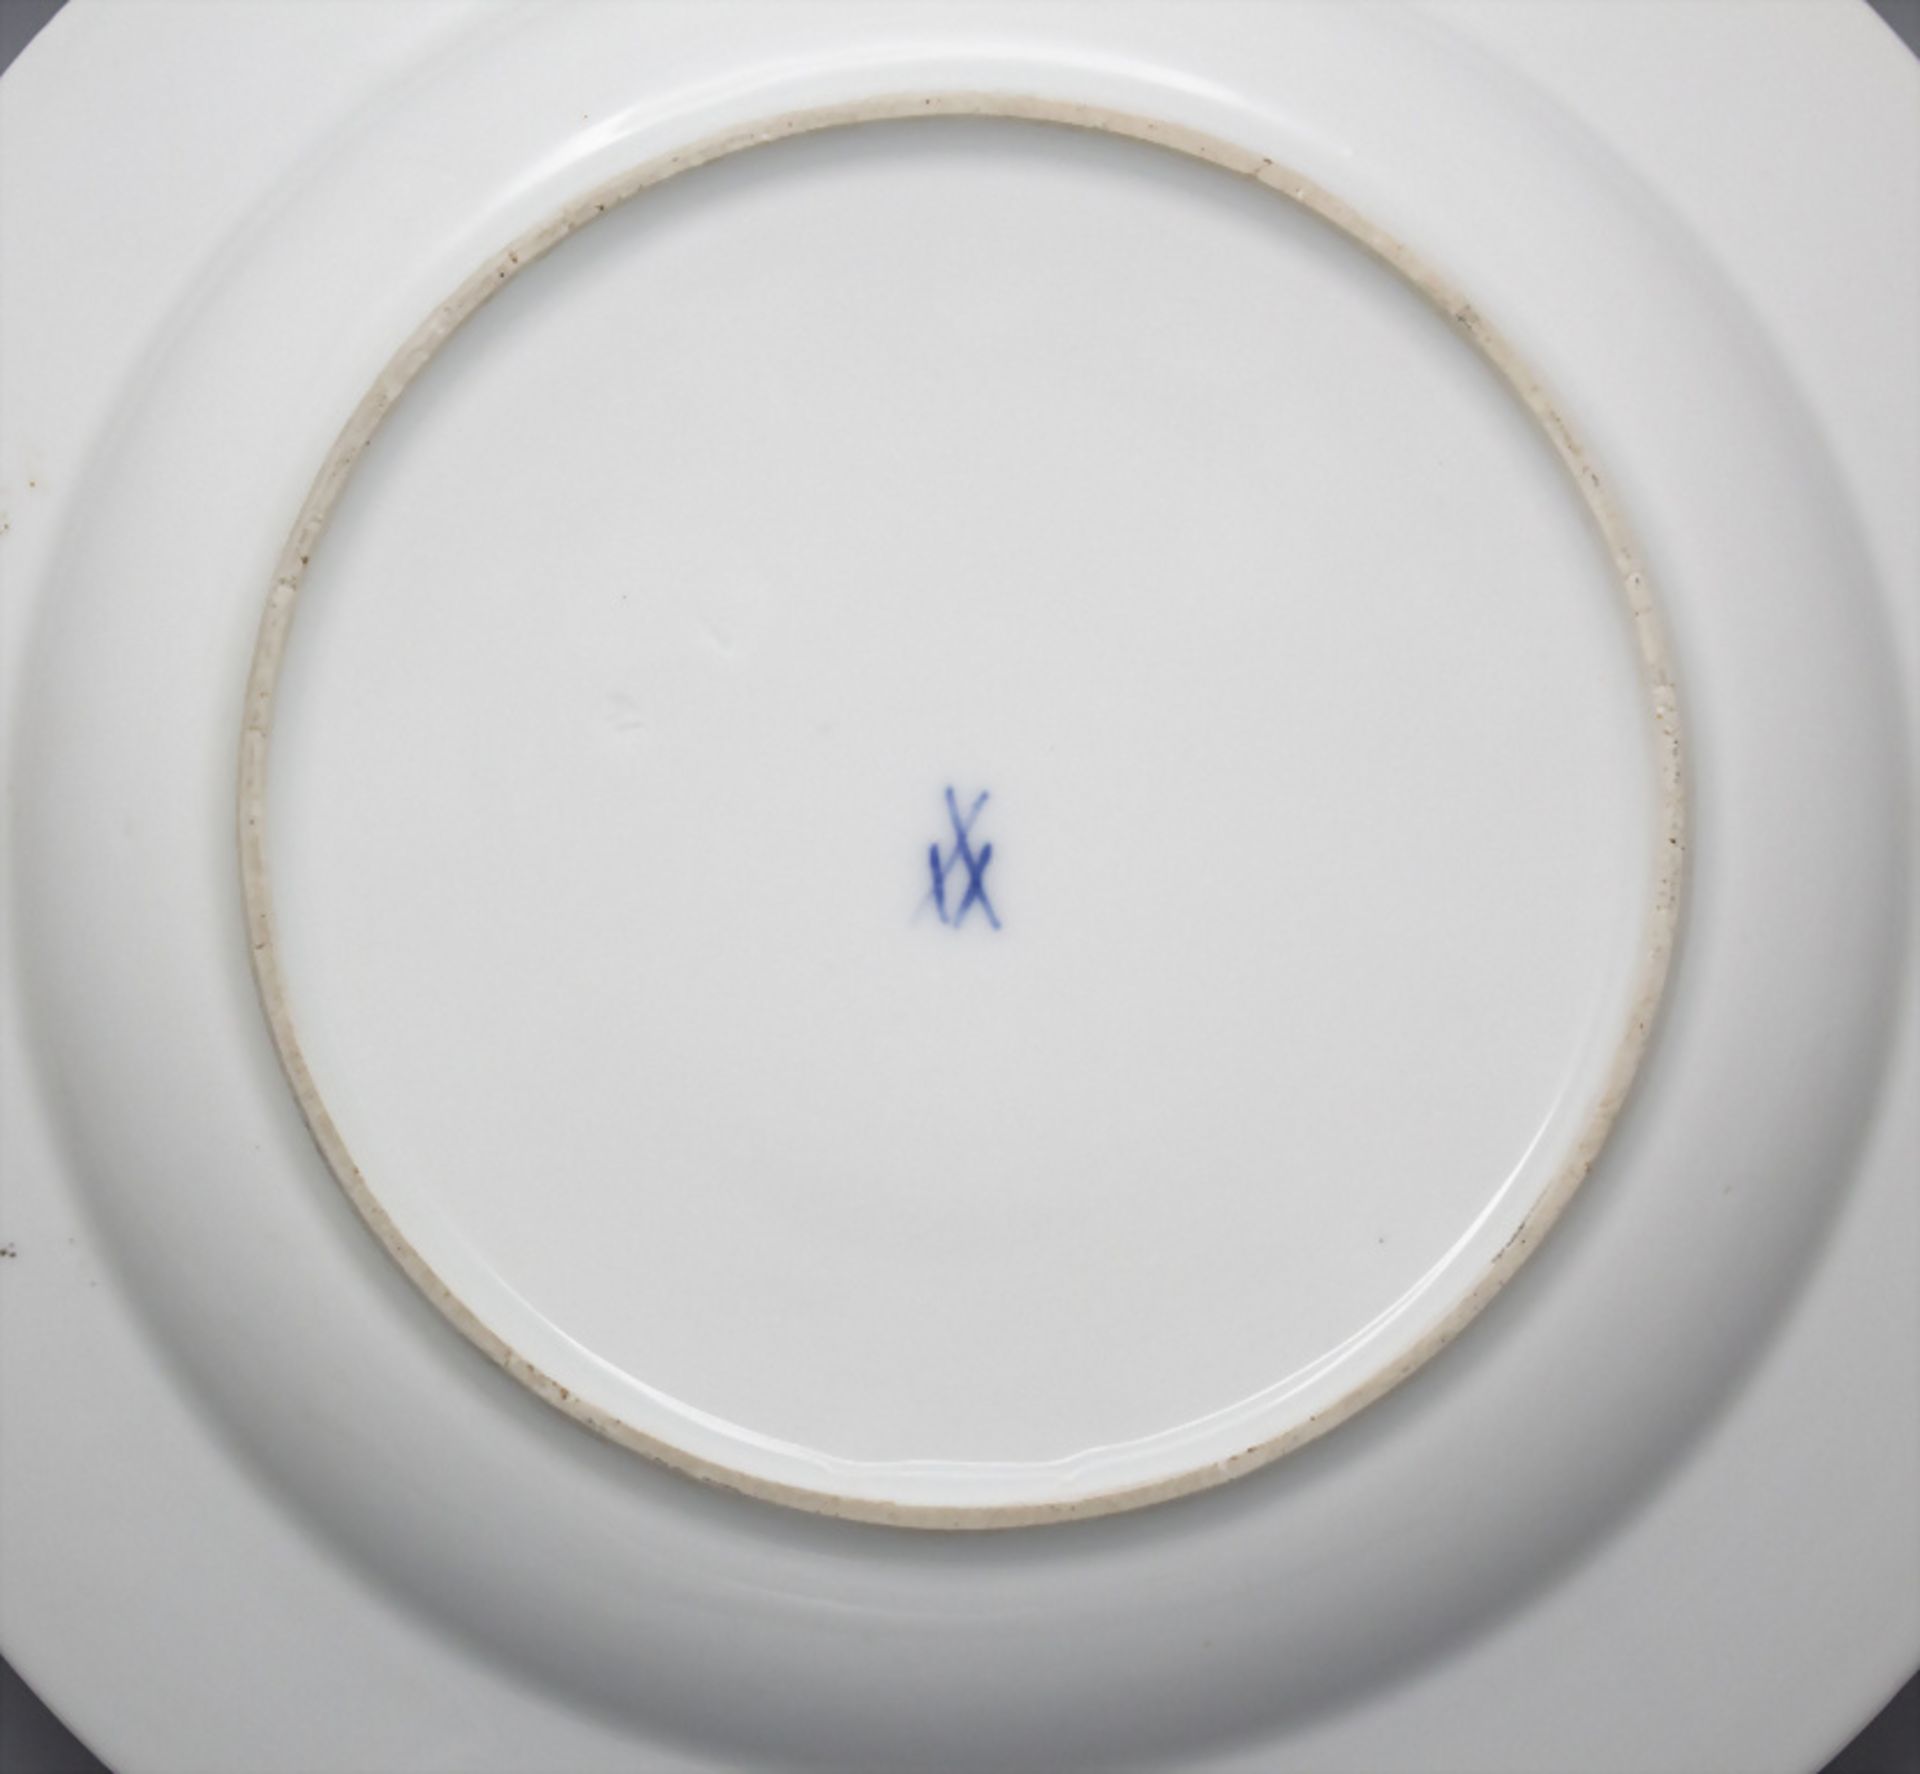 Speiseteller 'Rote Rose' / A dinner plate 'Red Rose', Meissen, Anfang 19. Jh. - Image 2 of 2